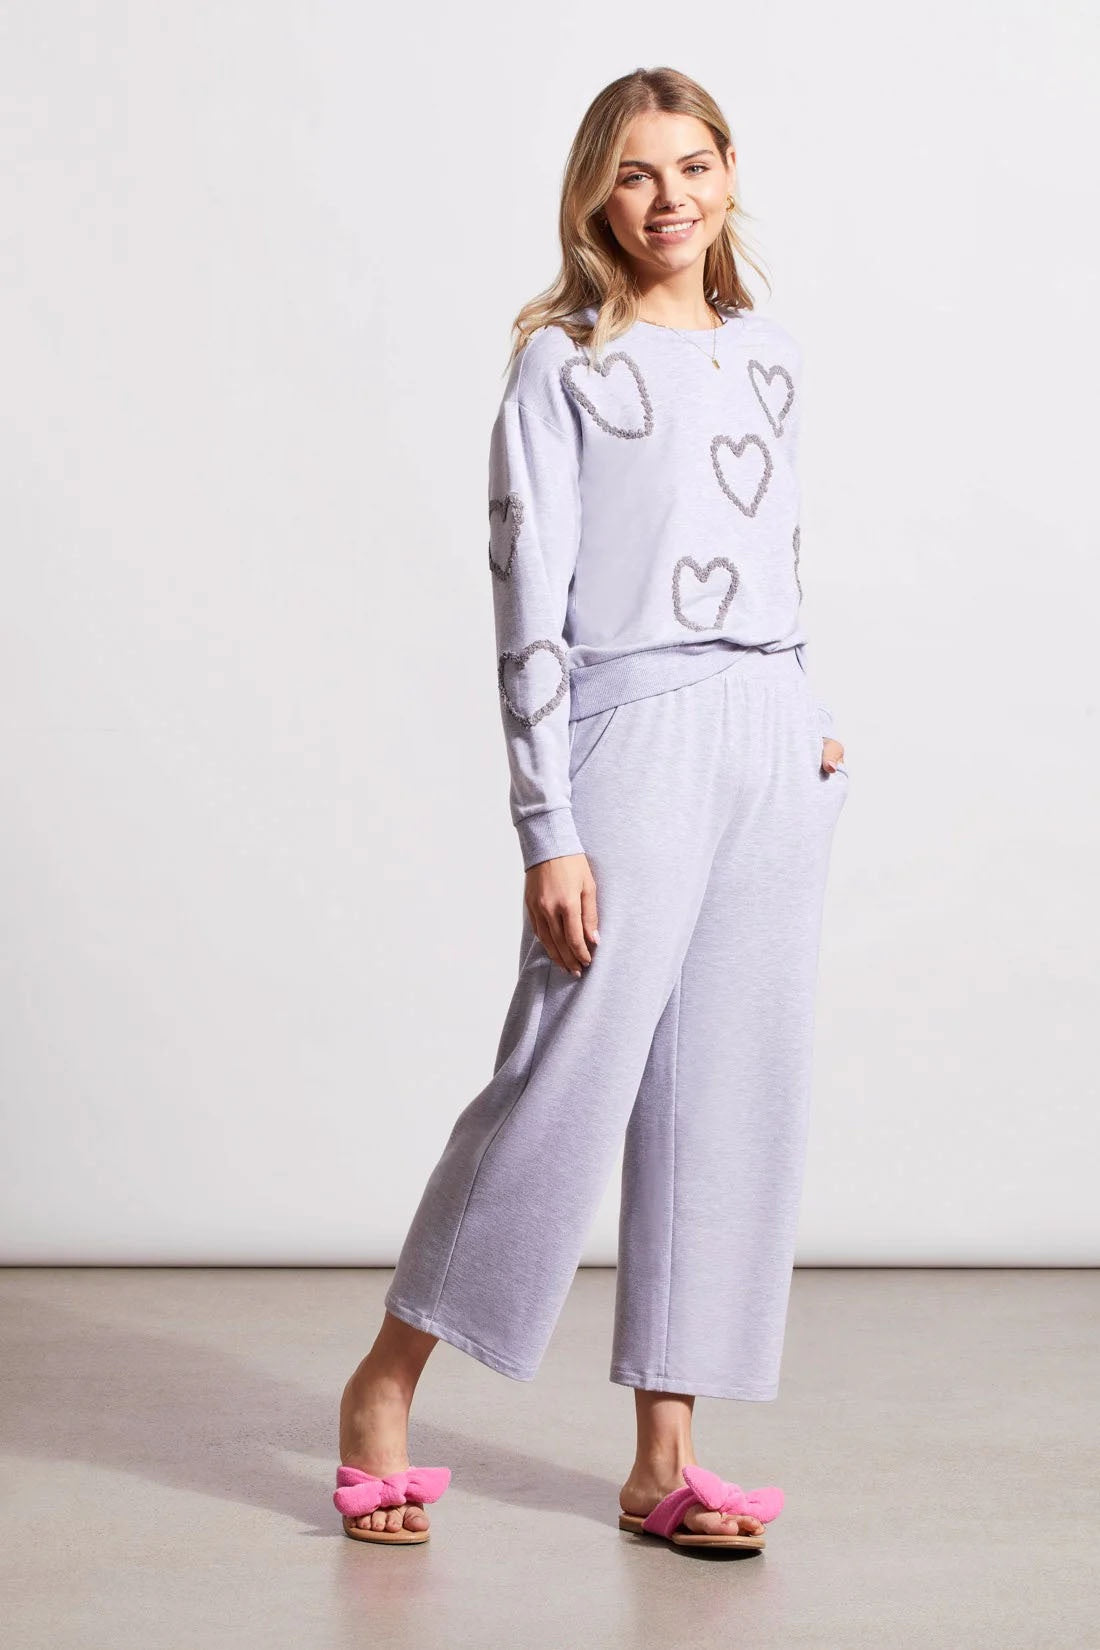 Womens Tribal French Terry Sweatshirt and Gaucho Jogger Set in Light Grey Mix